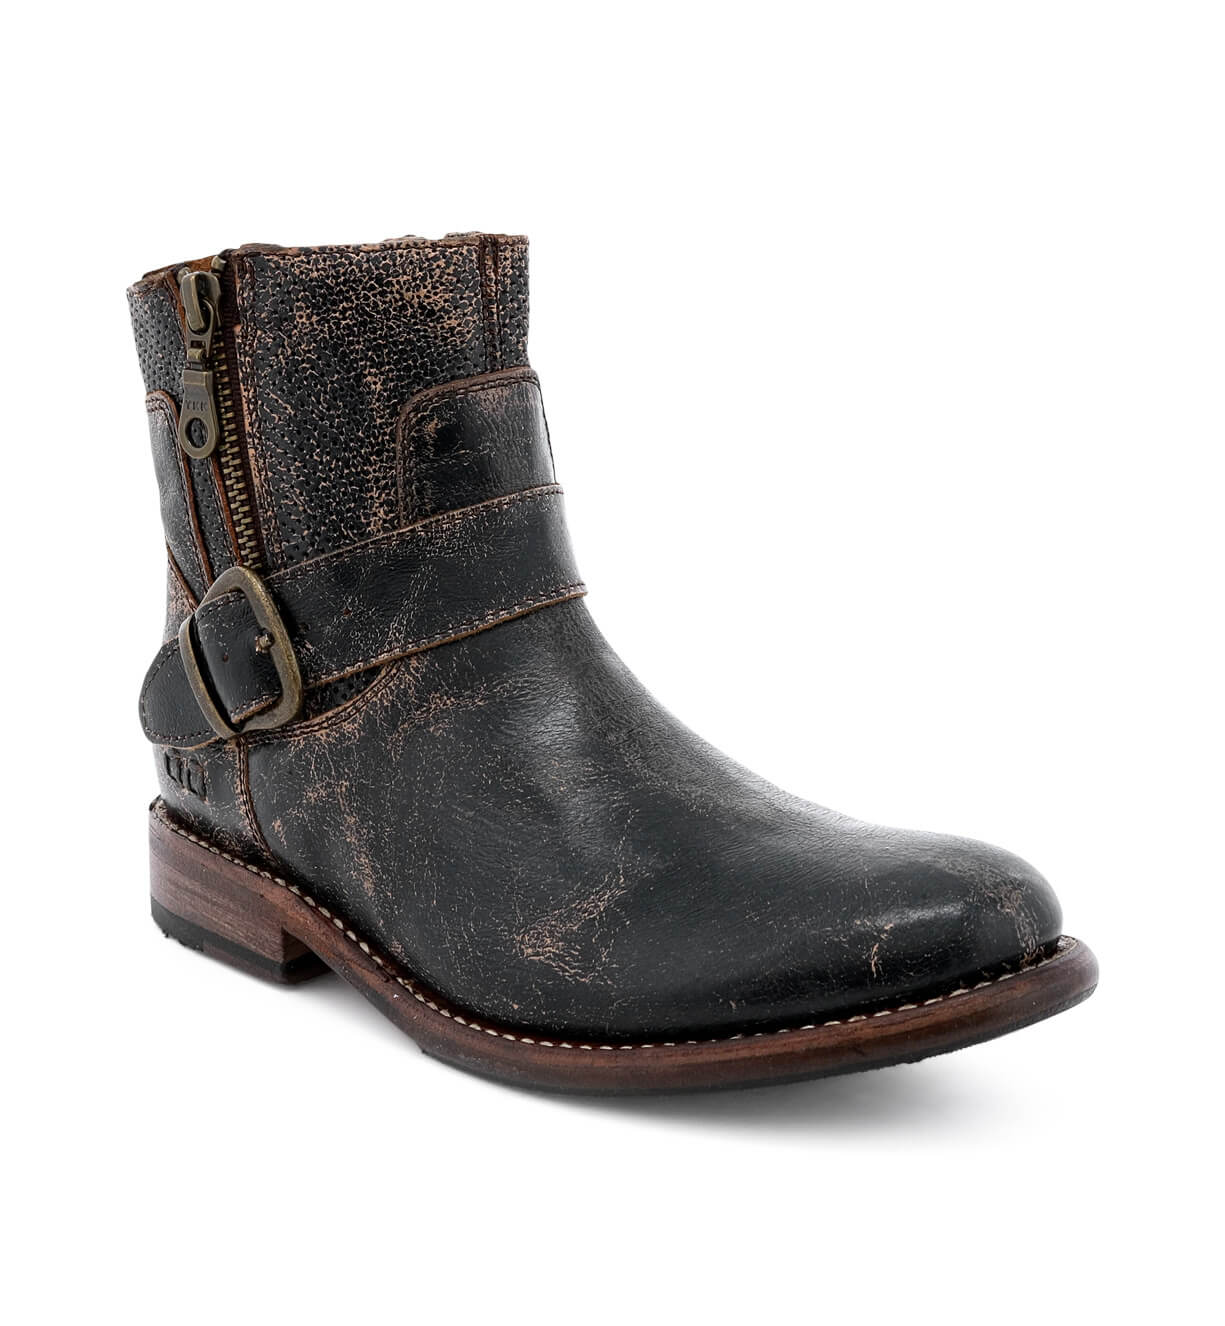 Bed Stu's Becca women's black leather ankle boots with buckles.